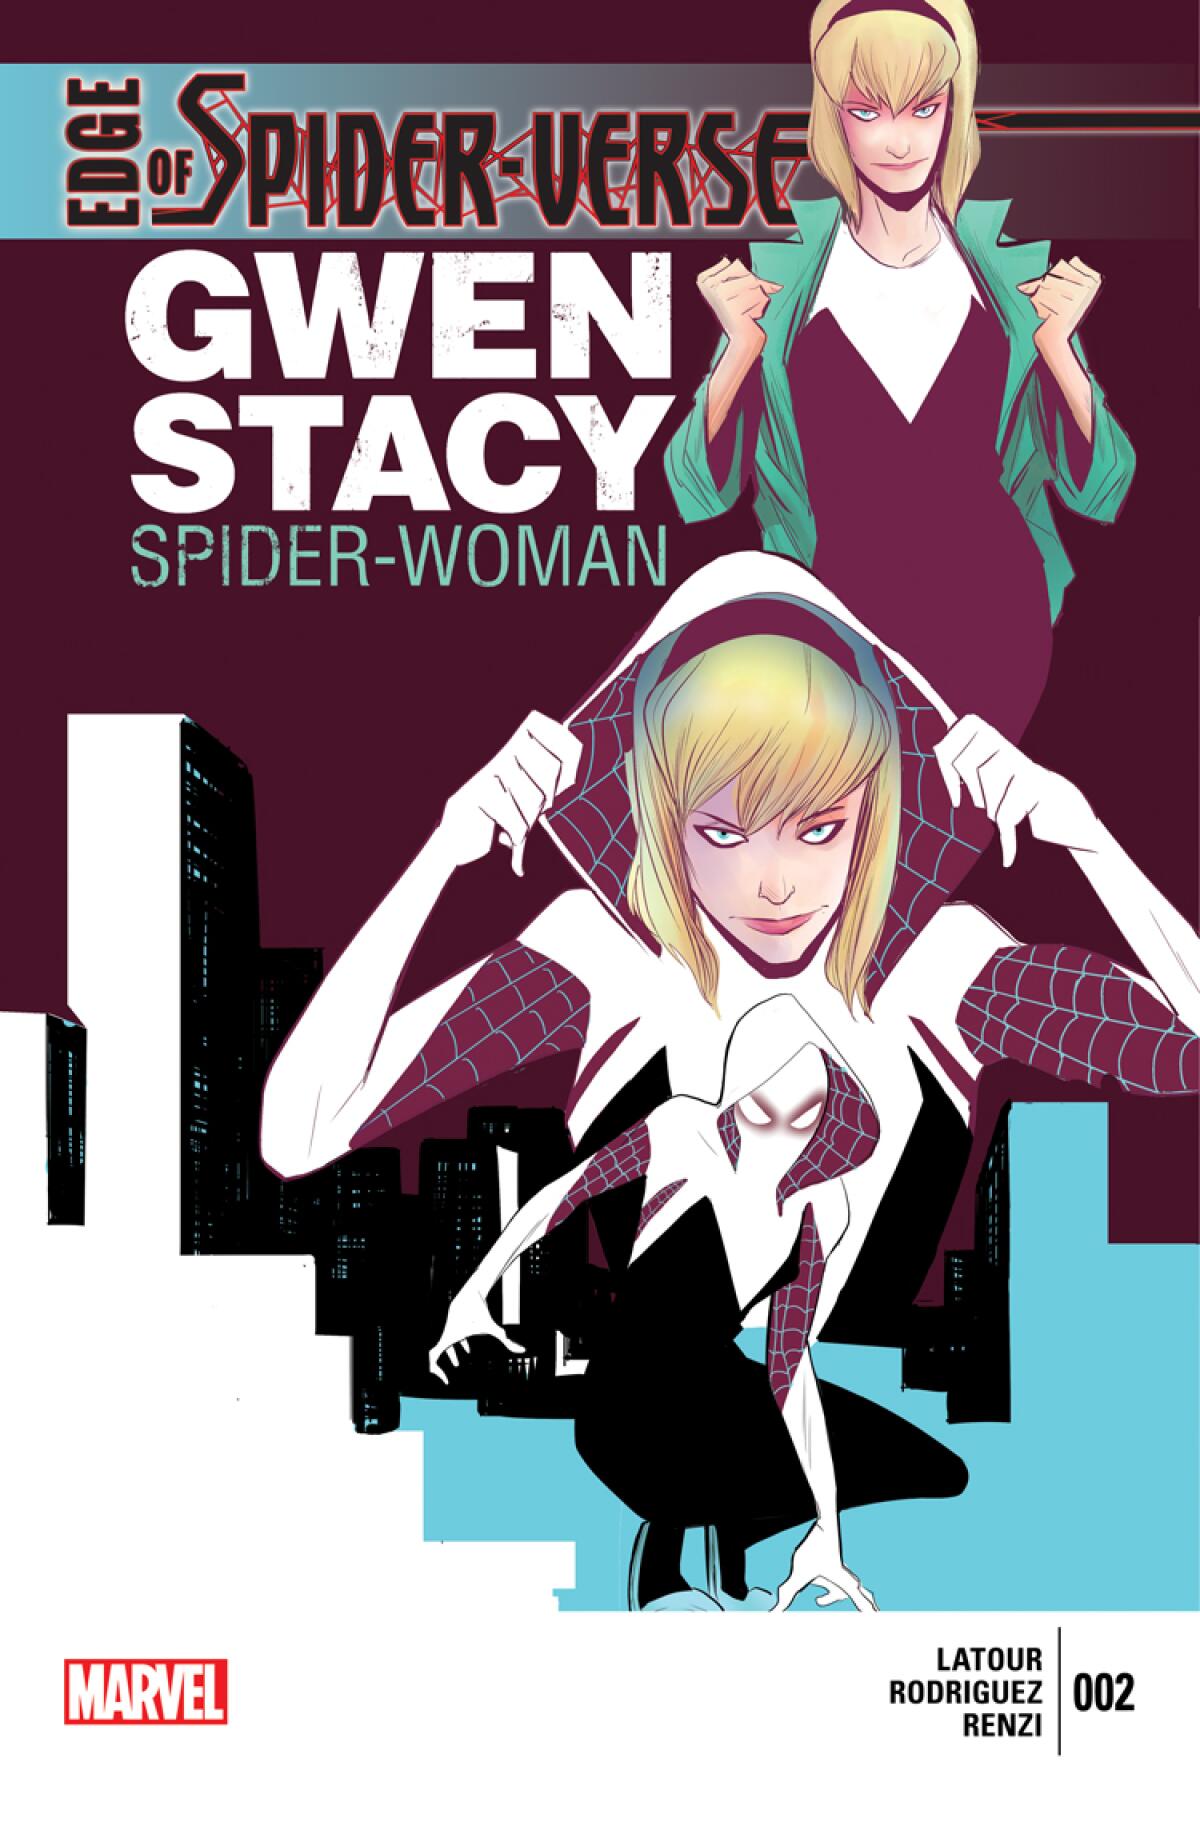 Spider-Gwen on the cover of "Edge of Spider-Verse" No. 2.